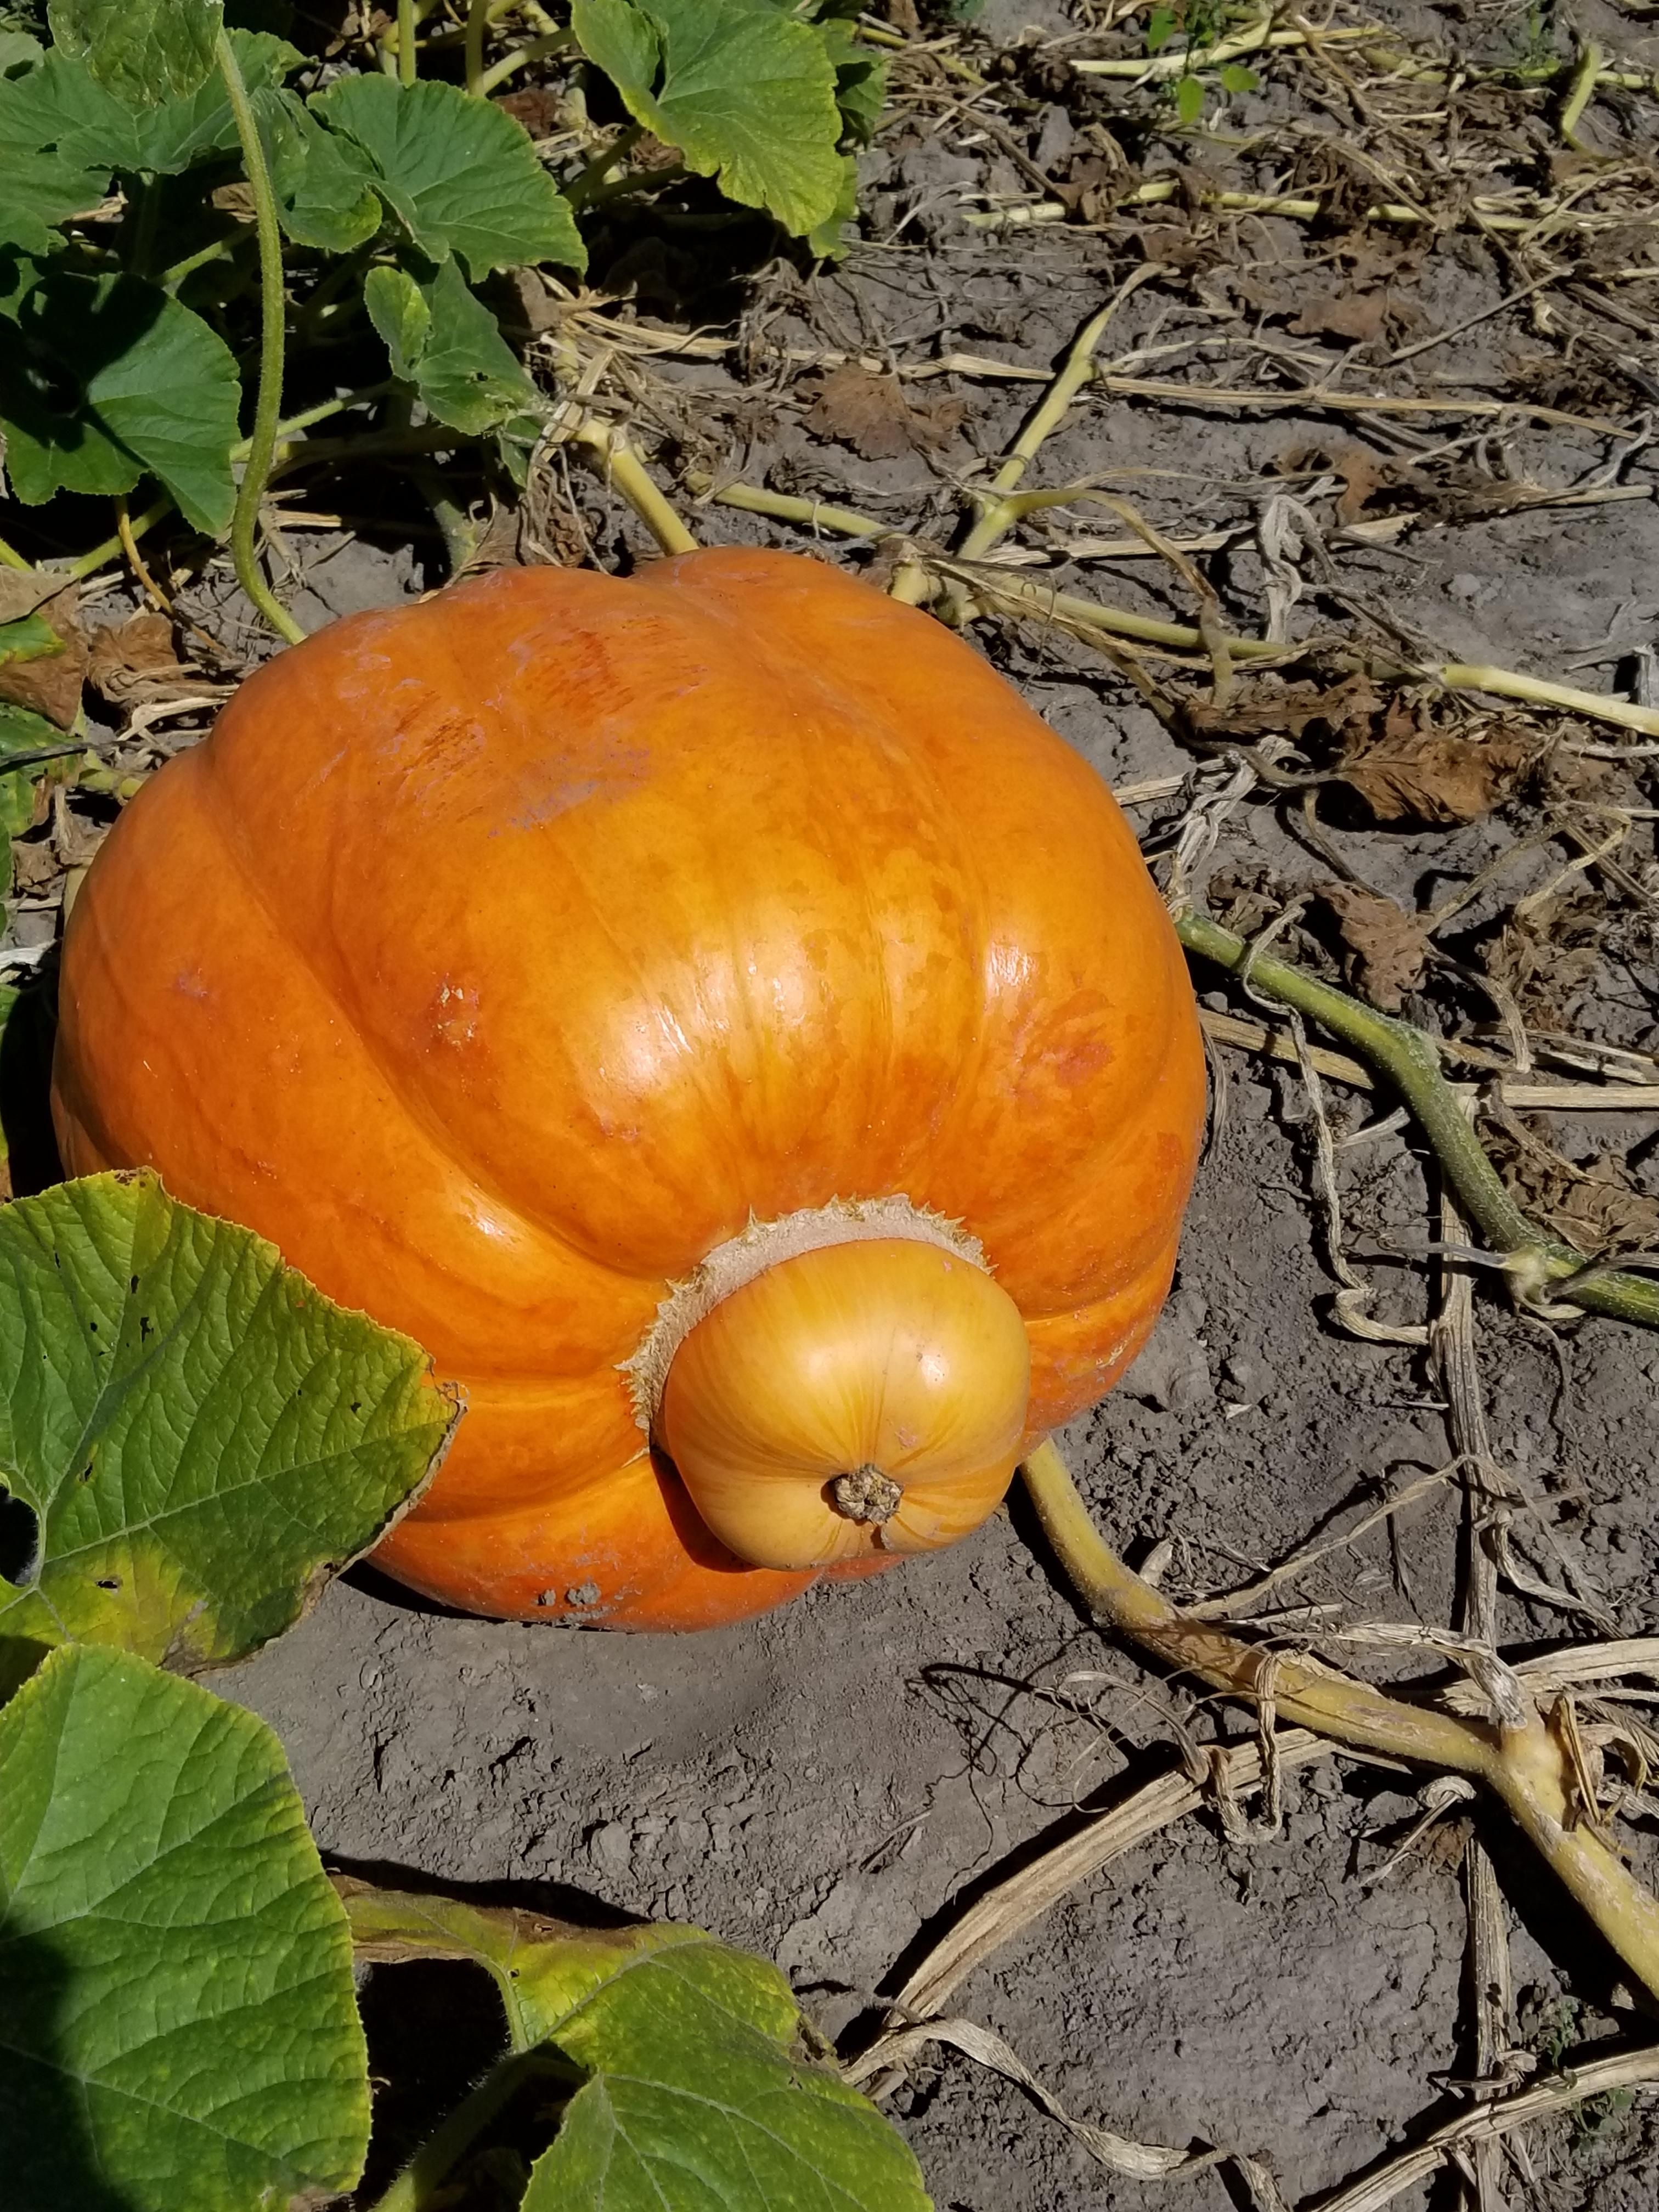 So that's where pumpkins come from!